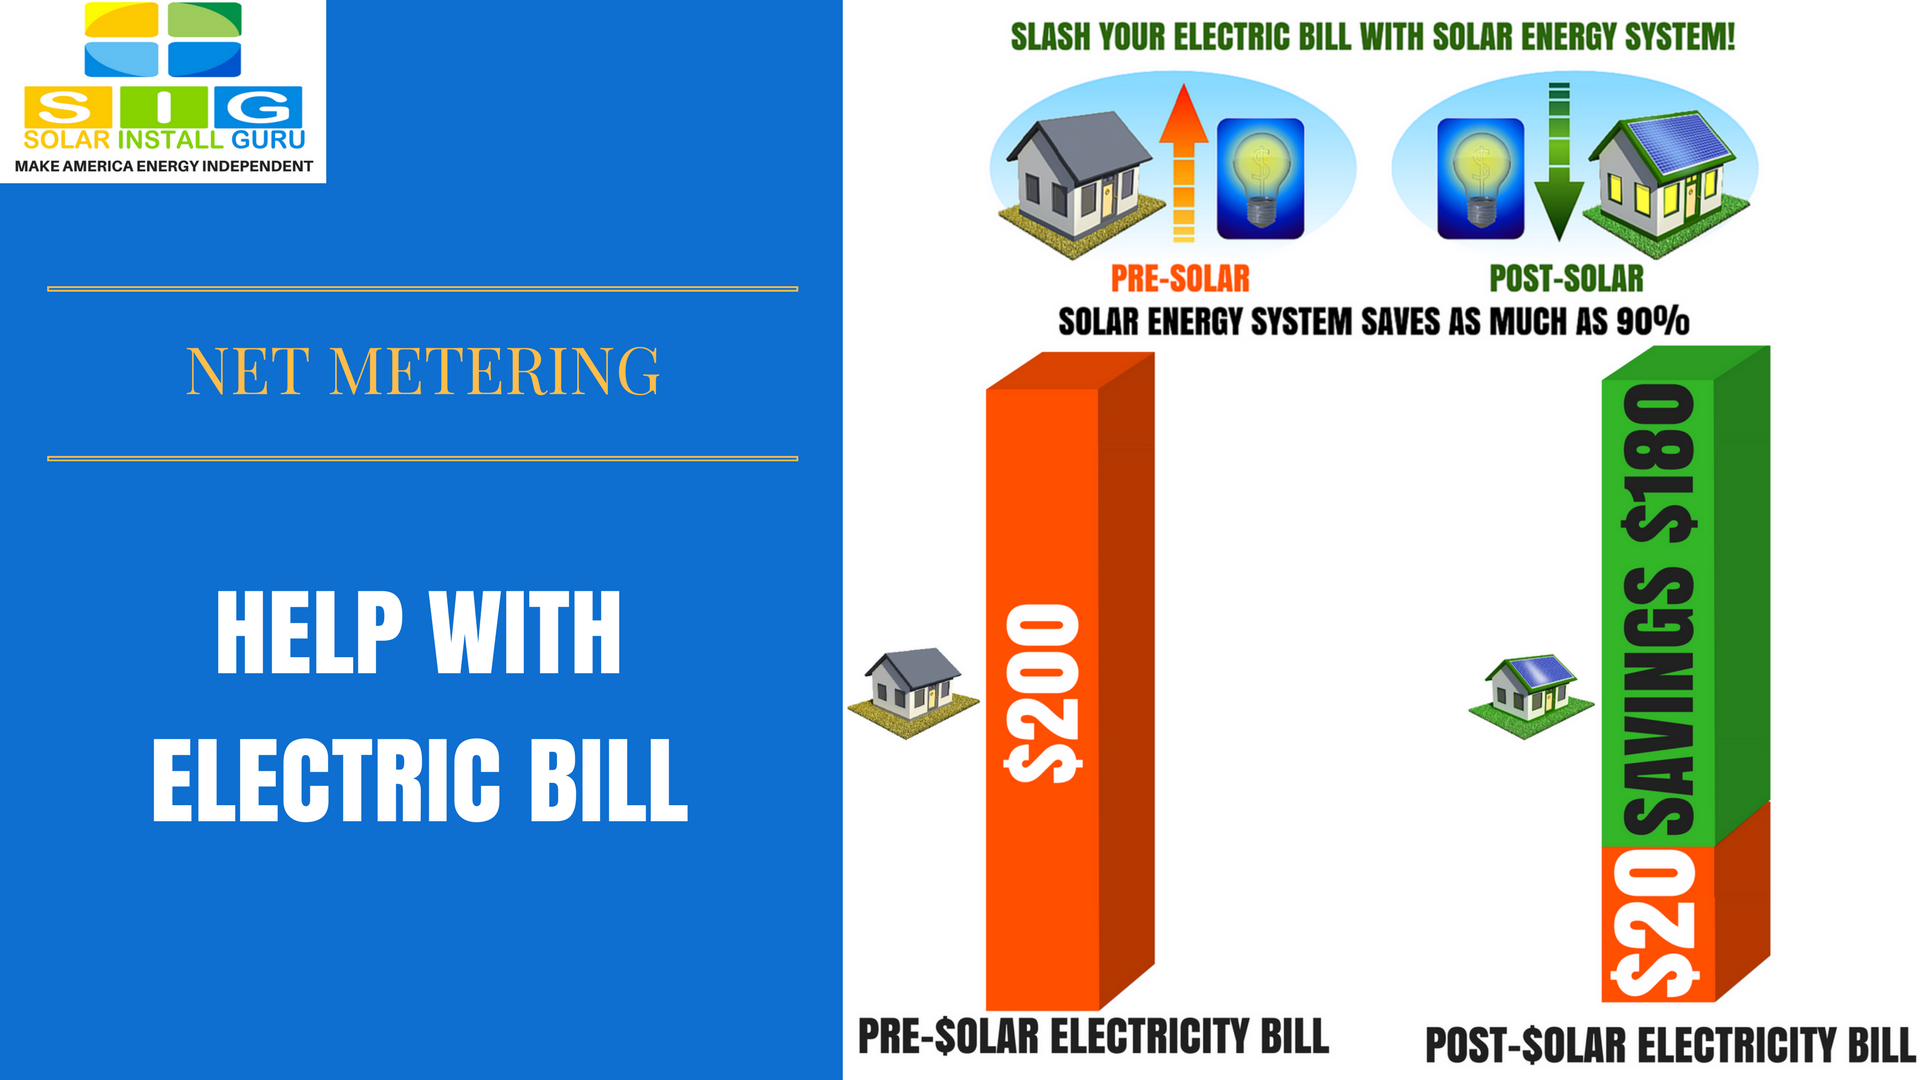 Net Metering Can Help With Electric Bill